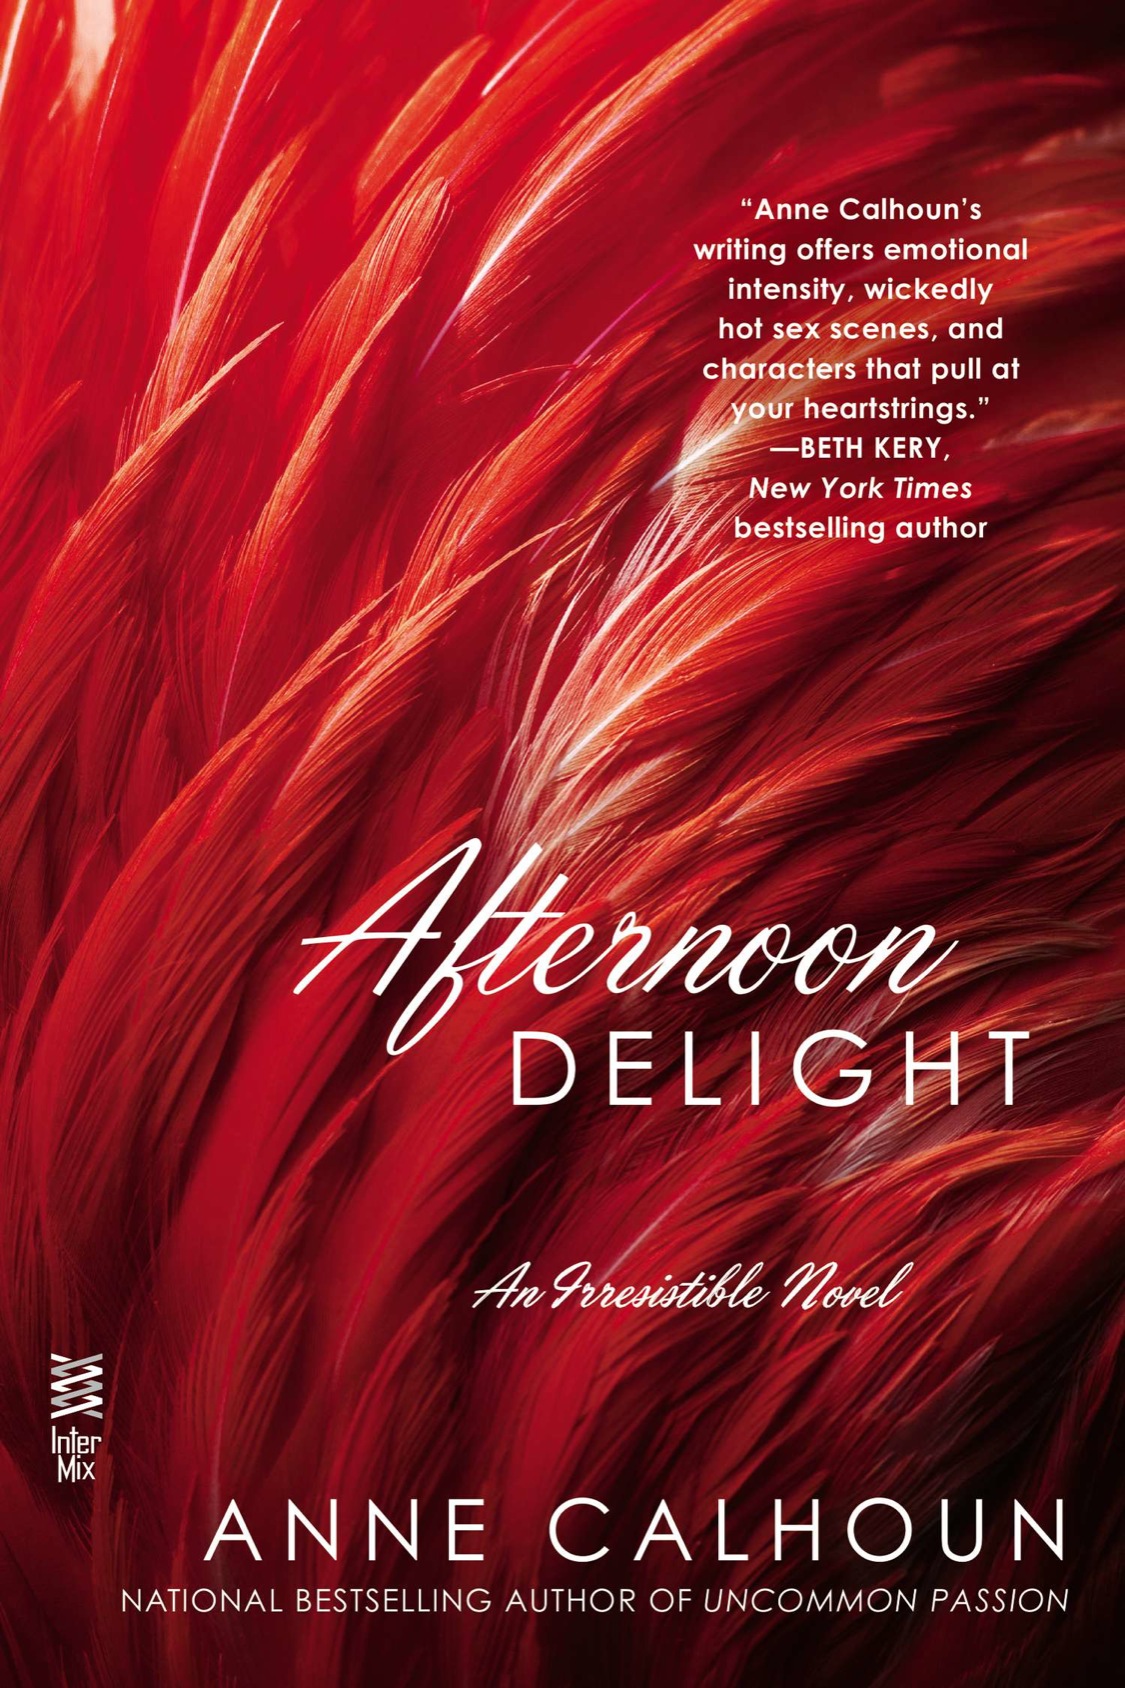 Afternoon Delight (2014) by Anne Calhoun